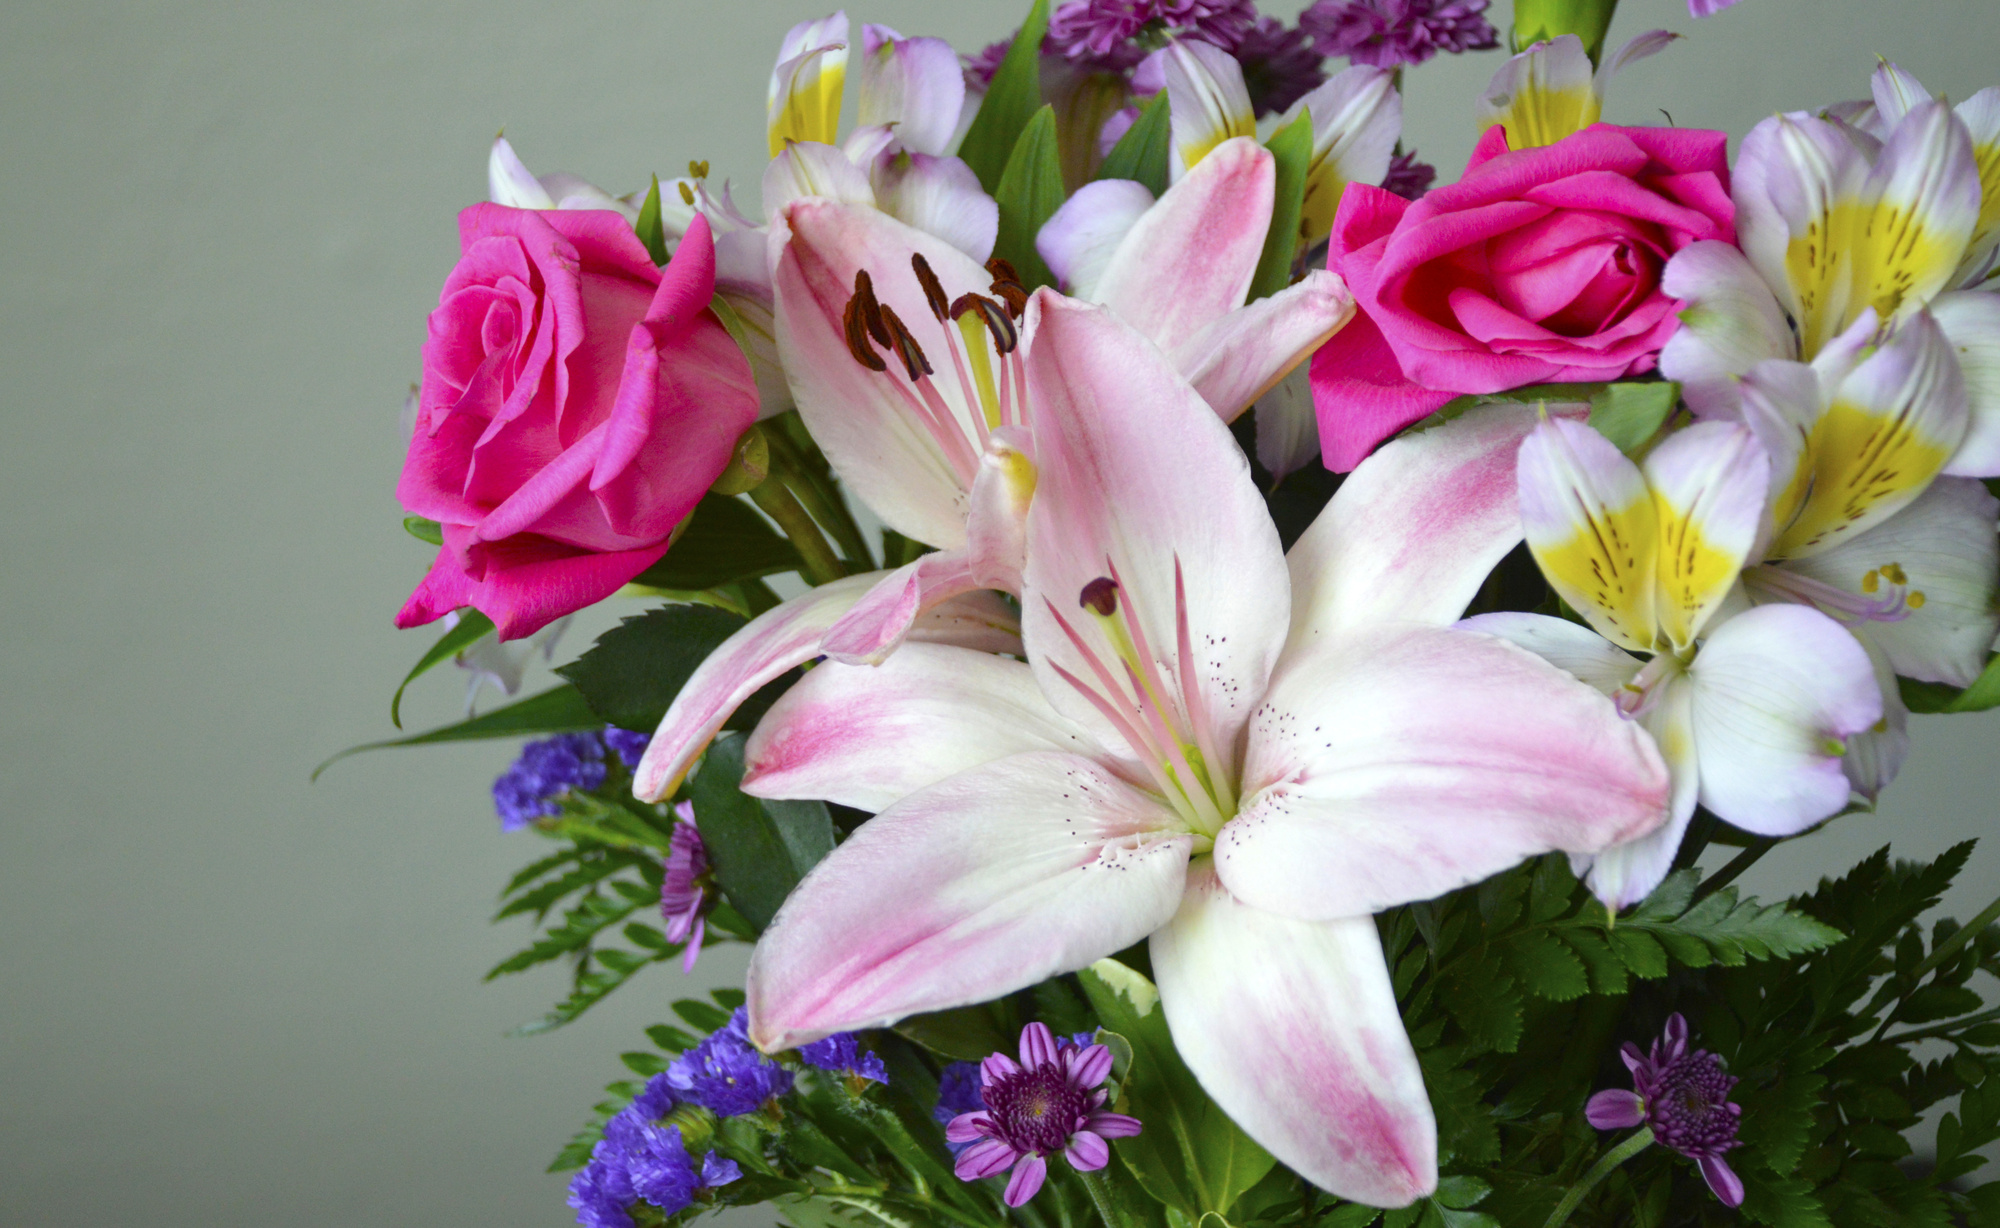 Speaking Flower Language: What Does Your Arrangement Say?